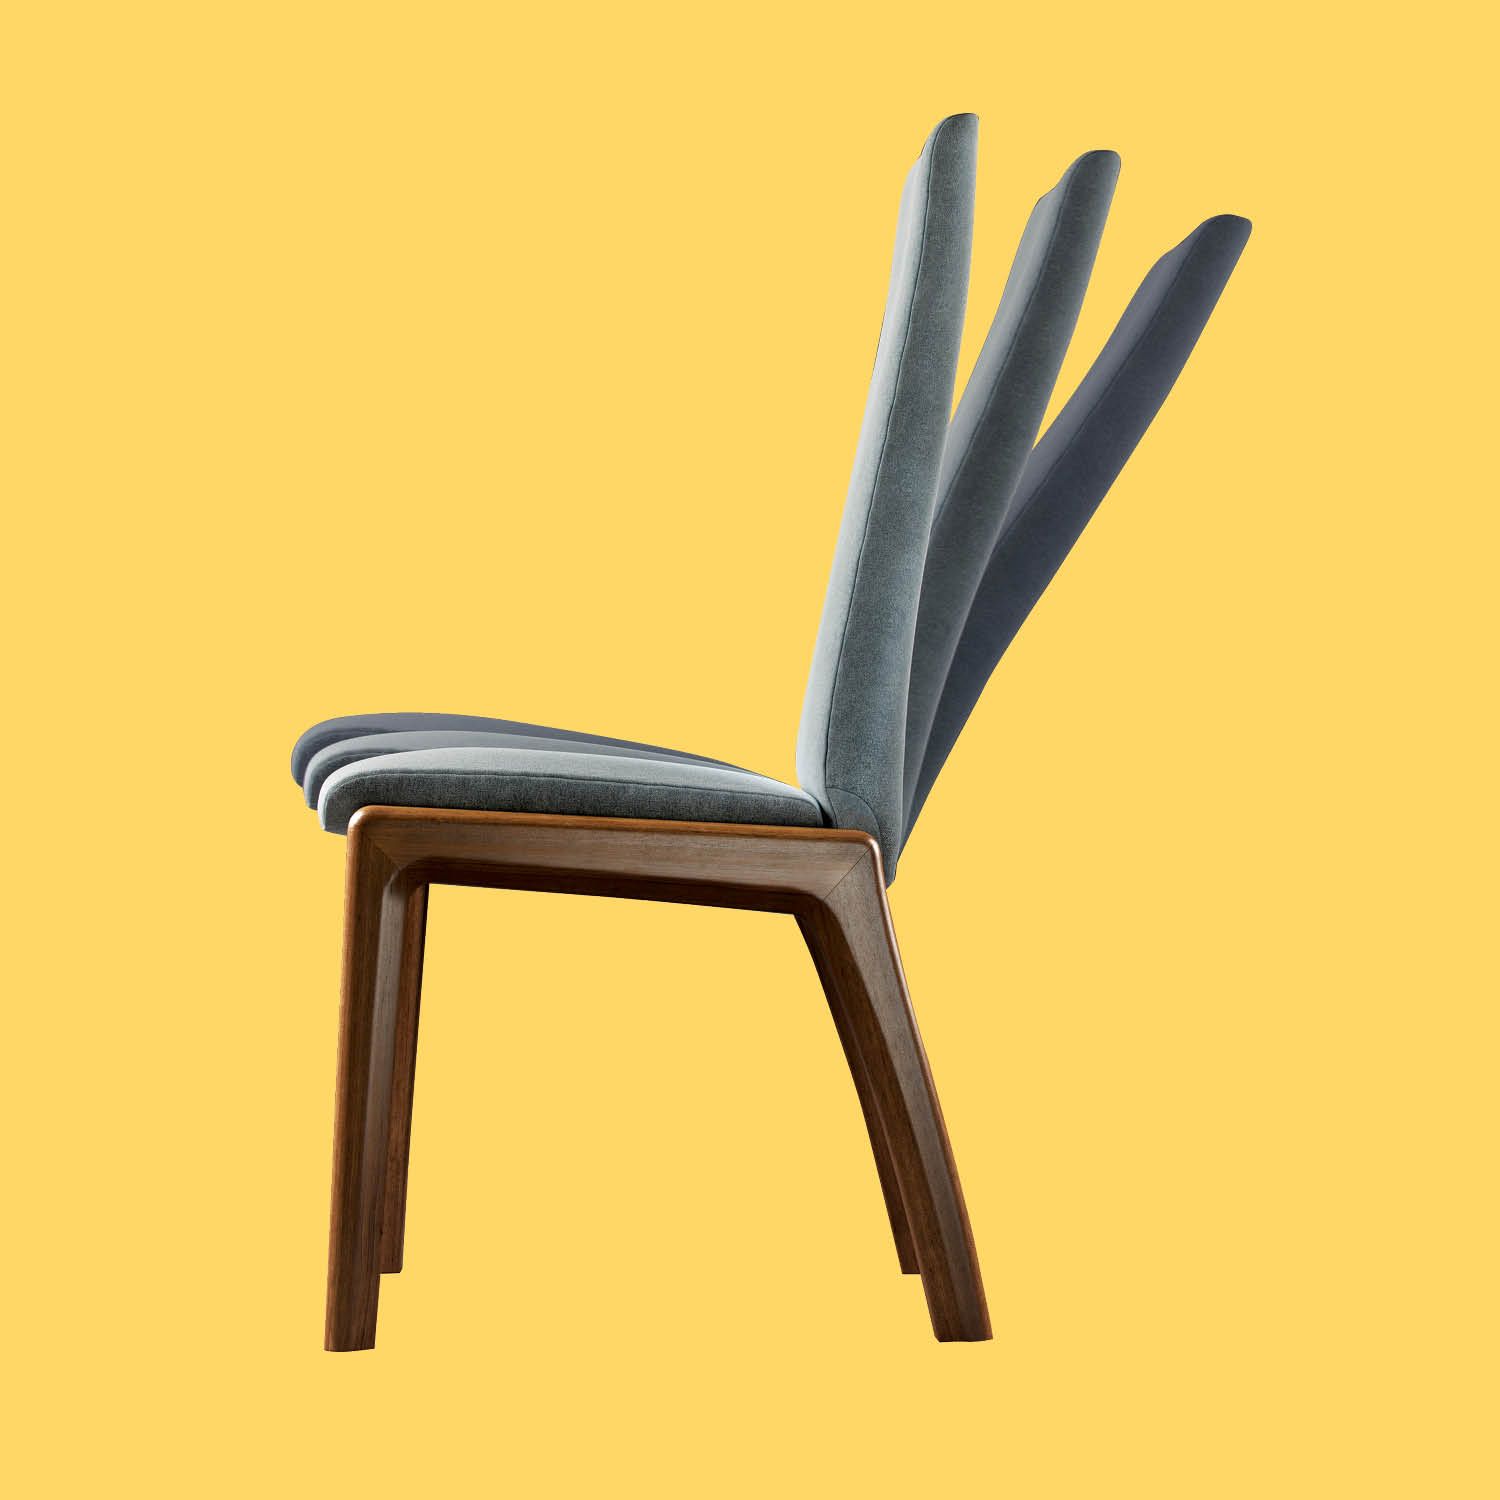 Chair, Furniture, Hand, Table, 